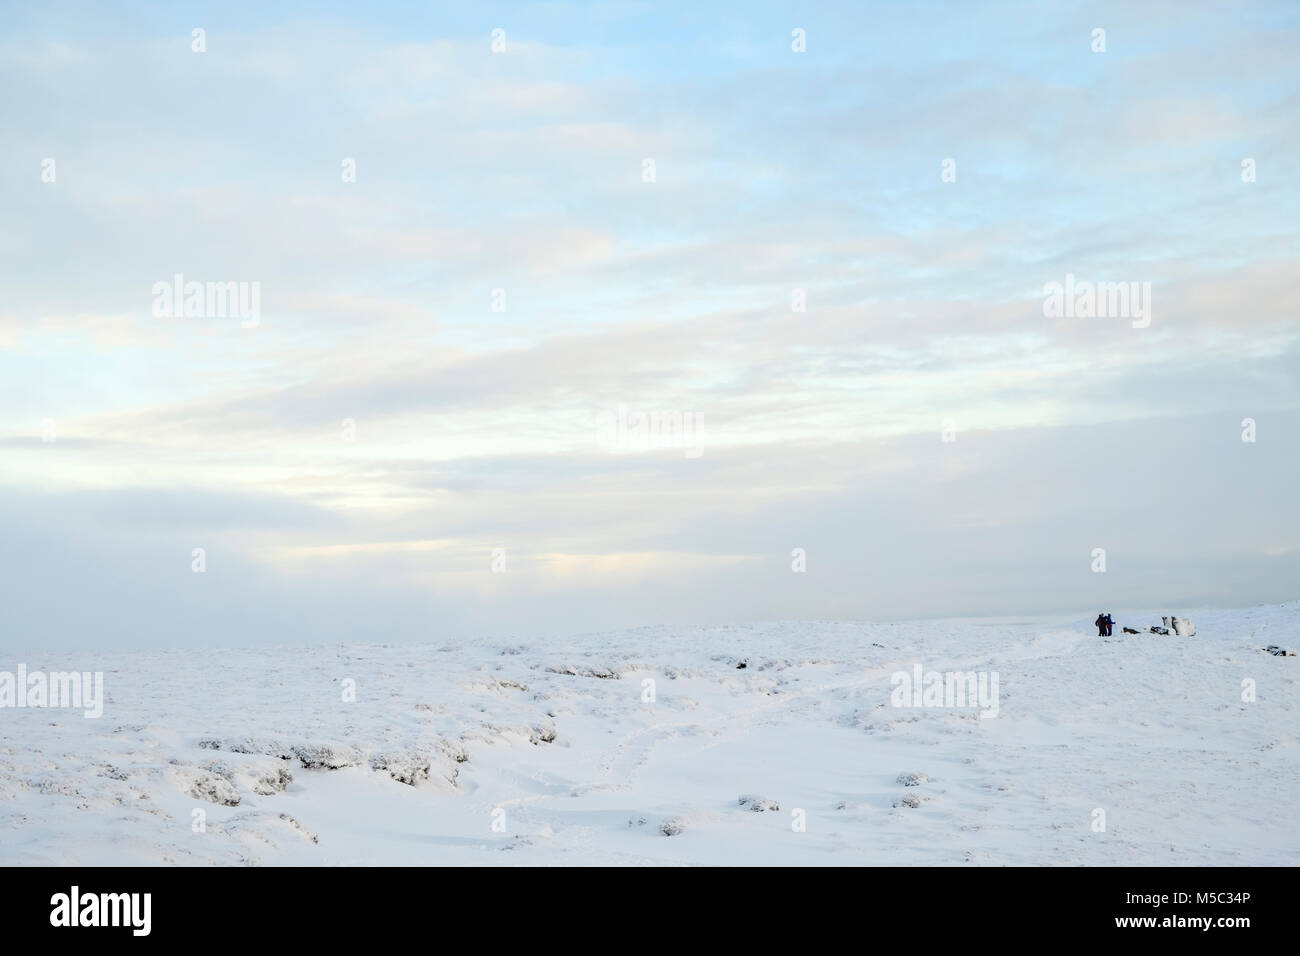 Winter landscape. Snow covered moorland with walkers in the distance, Edale Moor, Kinder Scout, Derbyshire, Peak District National Park, England, UK Stock Photo